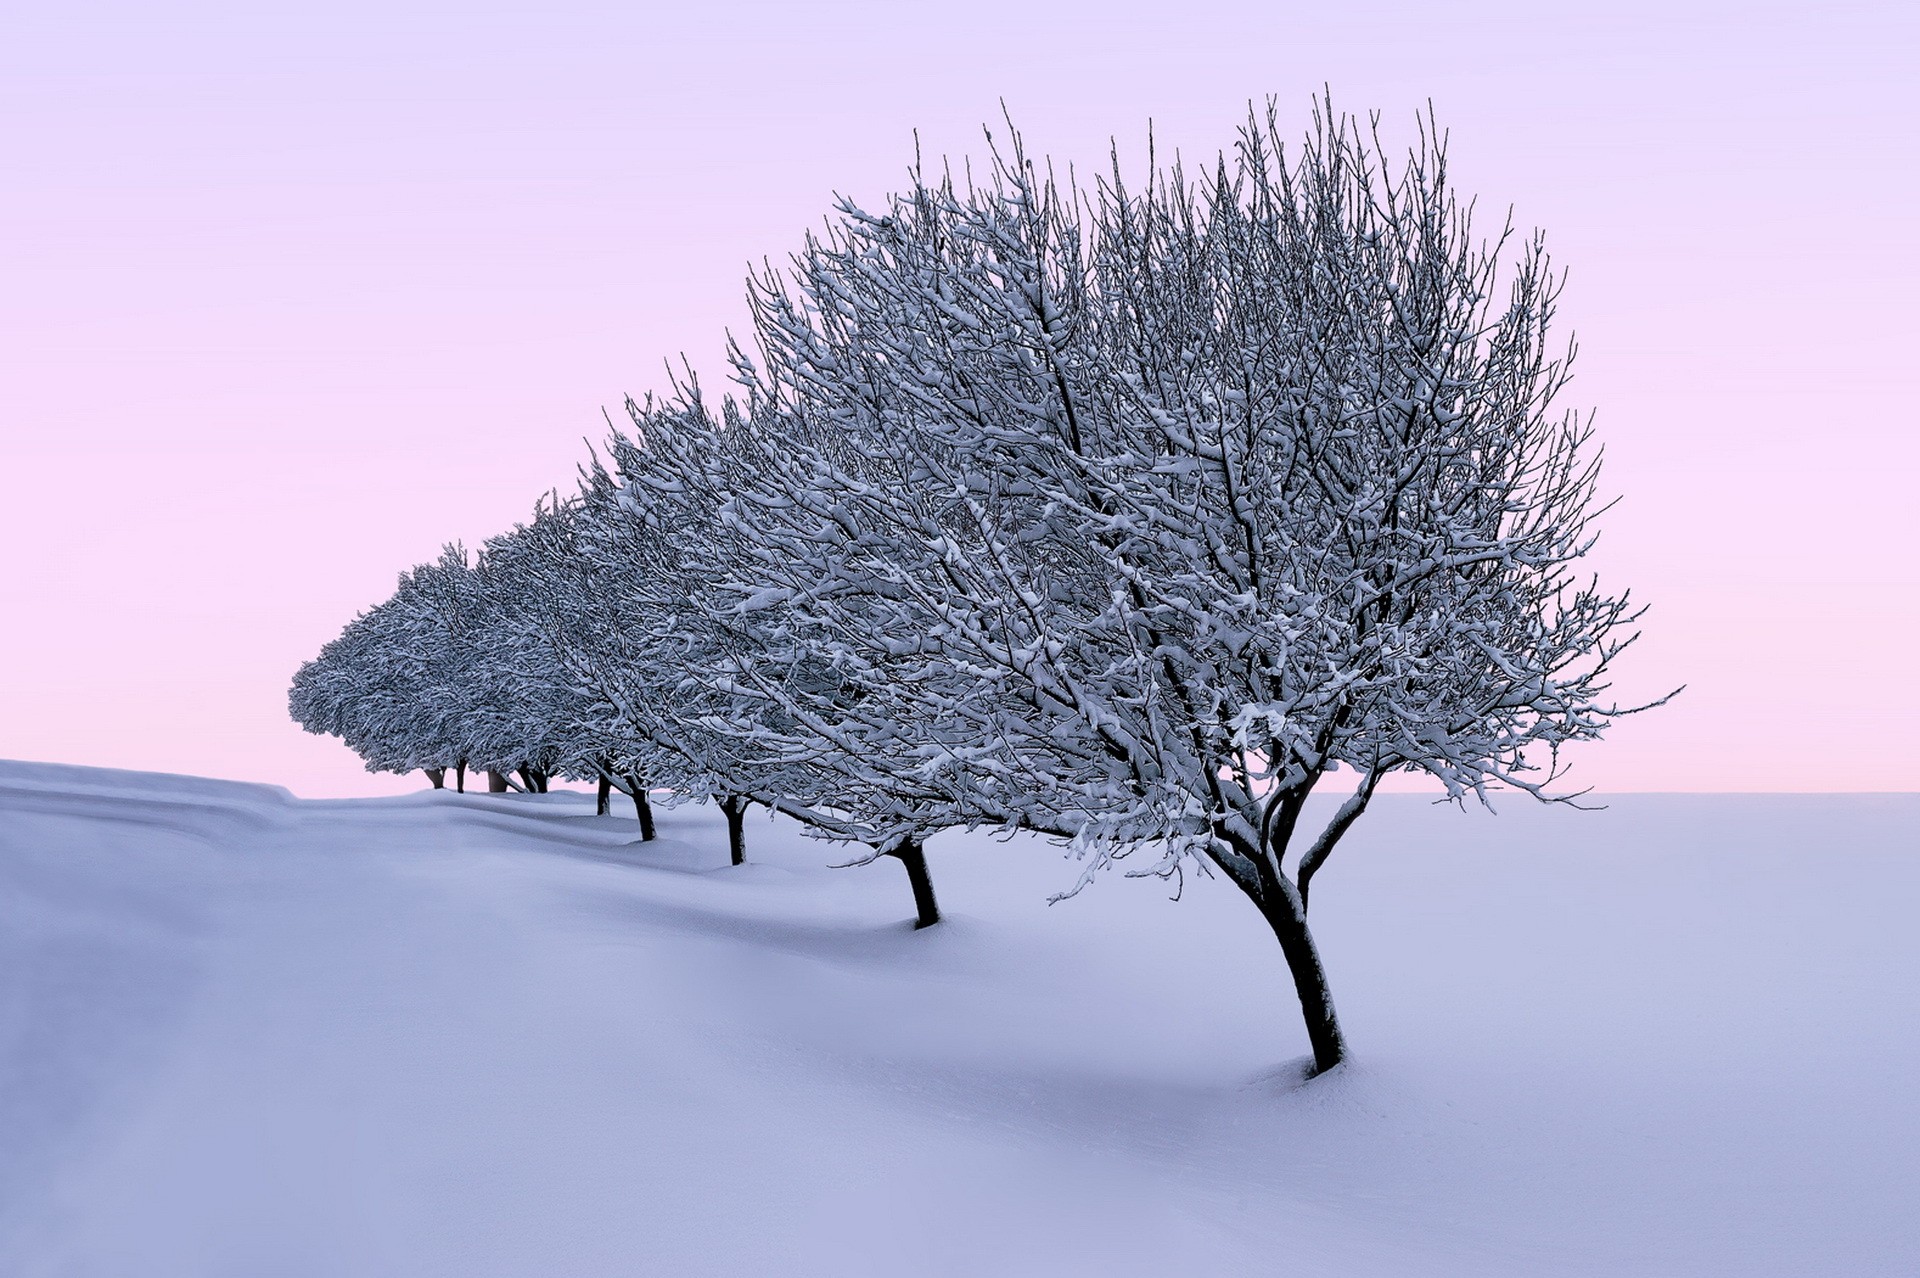 General 1920x1278 trees seasons landscape nature winter outdoors cold